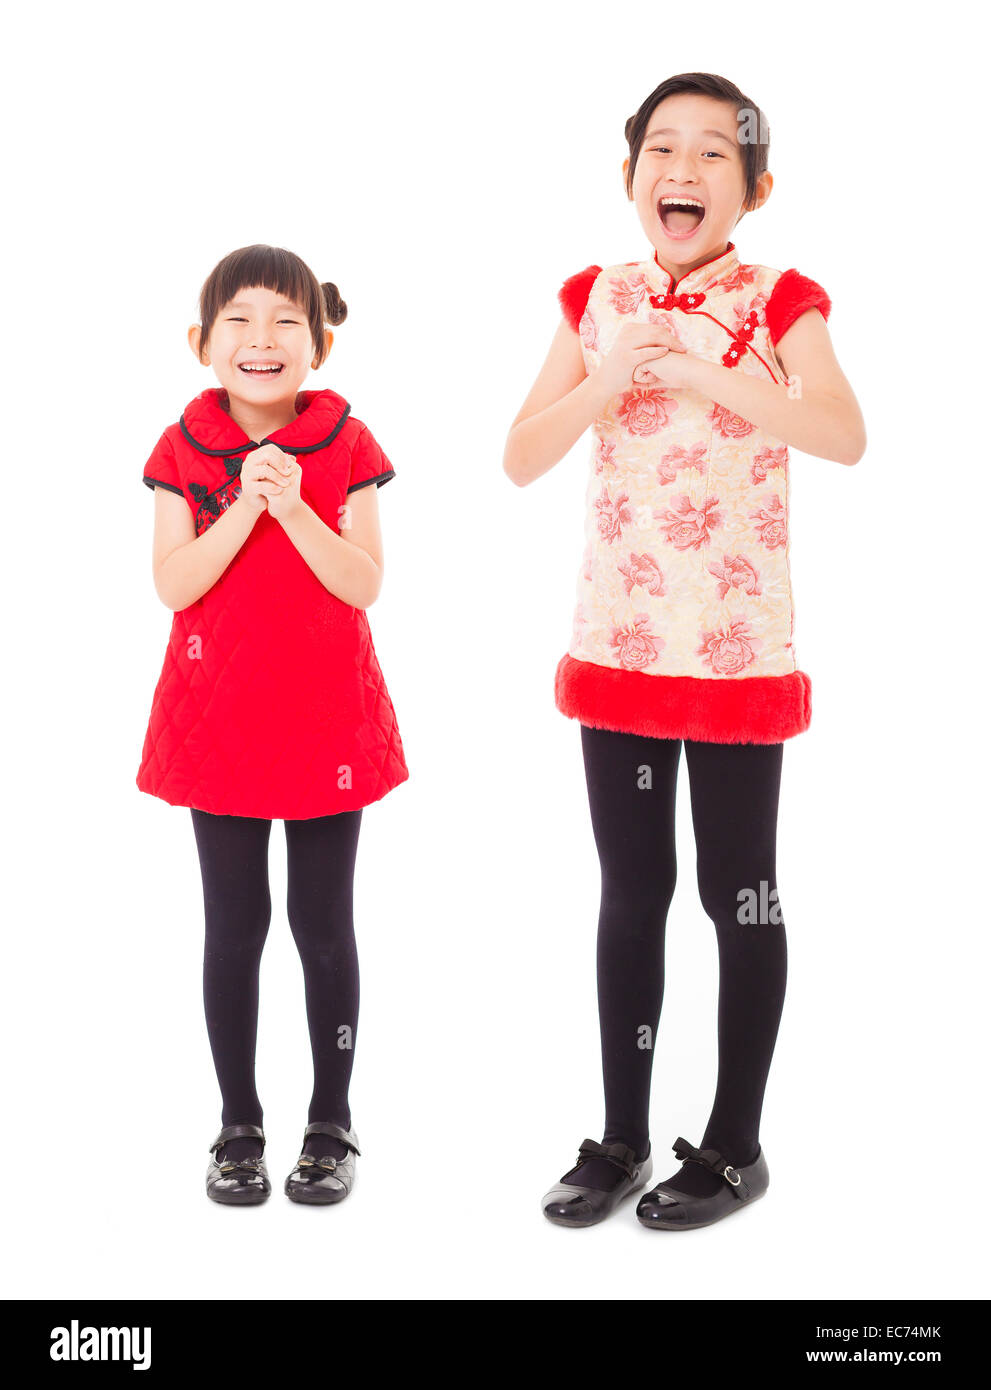 happy chinese new year. smiling little girls with congratulation gesture Stock Photo